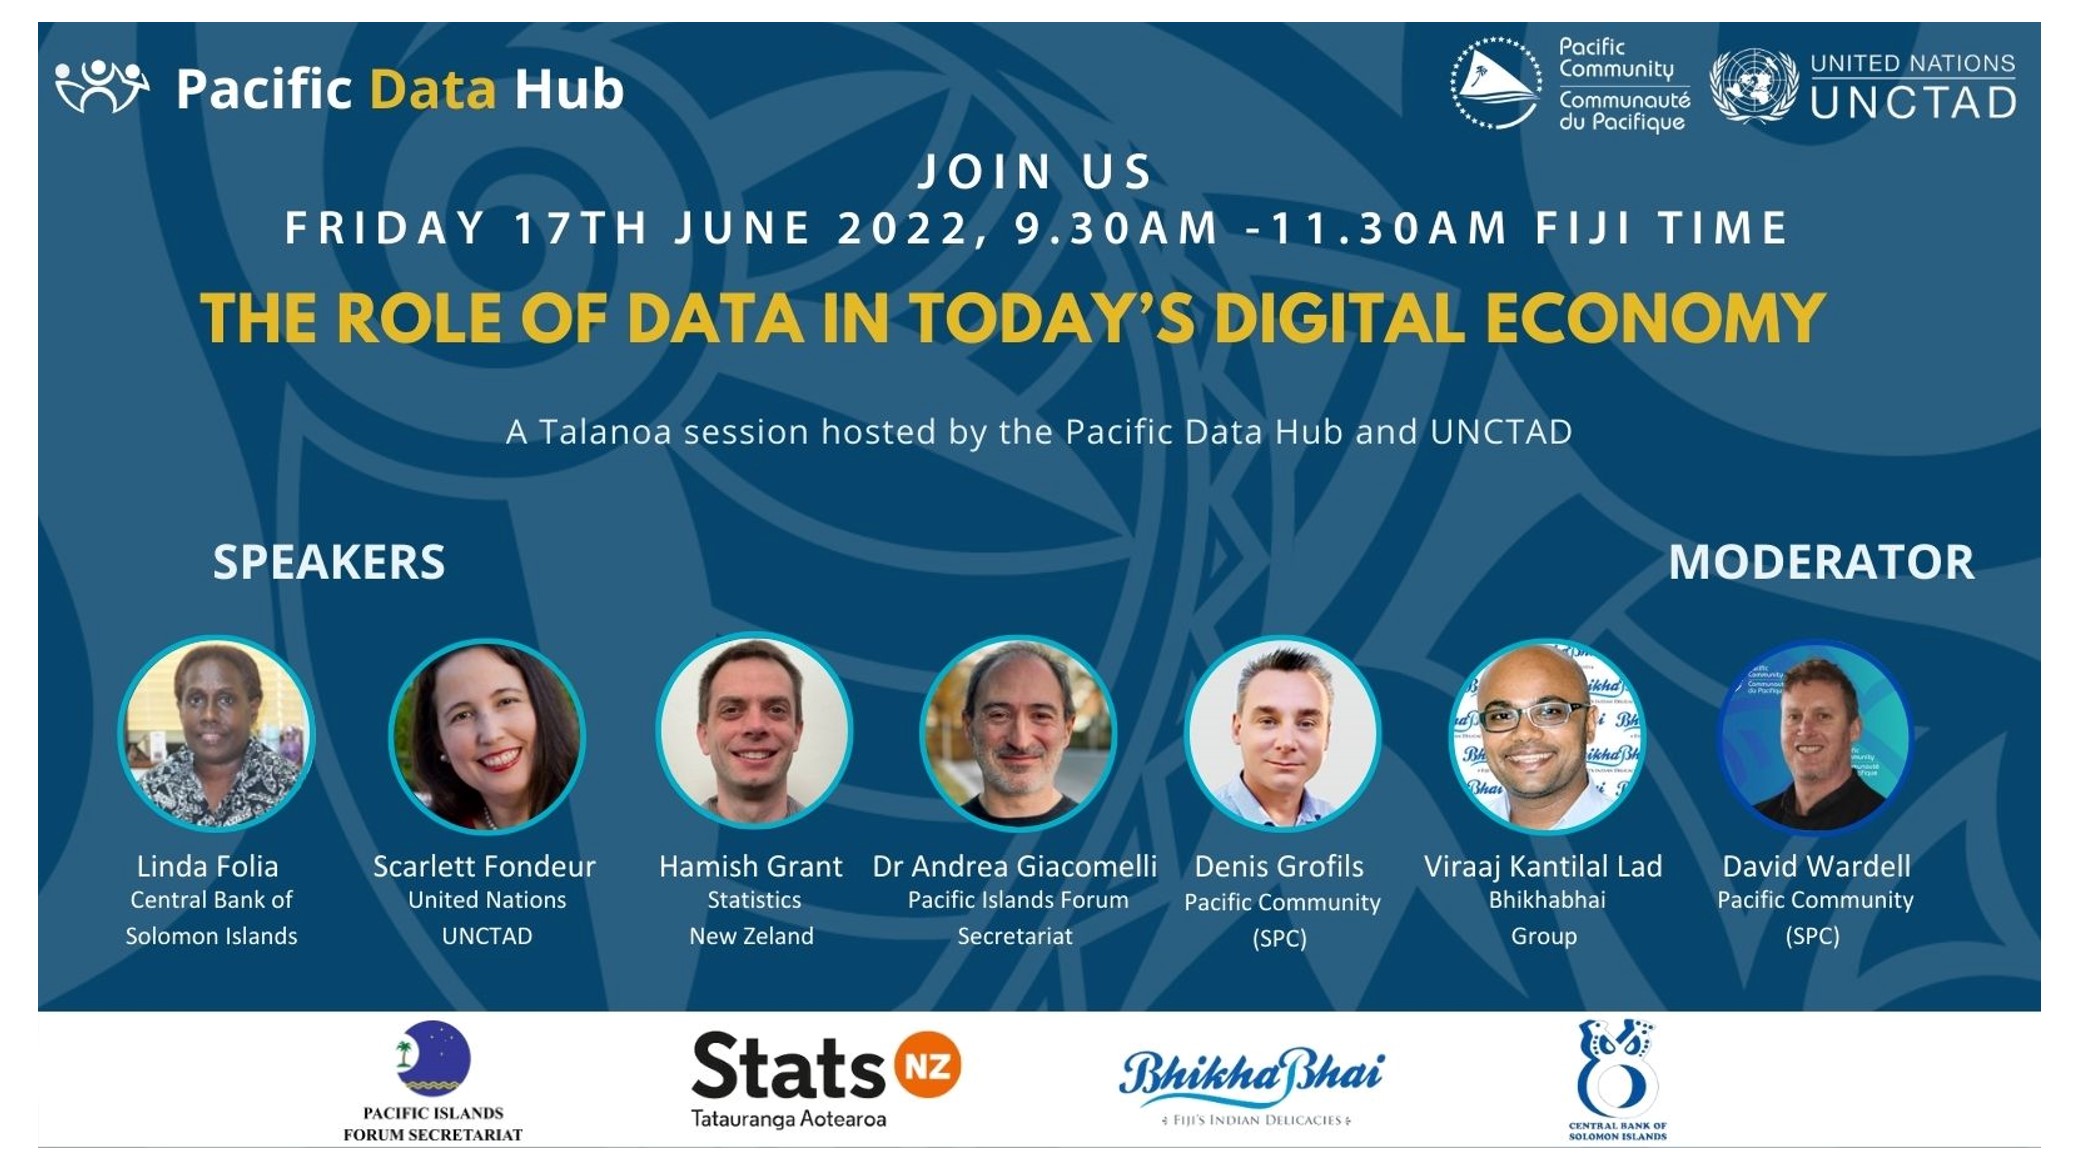 Webinar on the Role of Data in Today's Digital Economy in the Pacific